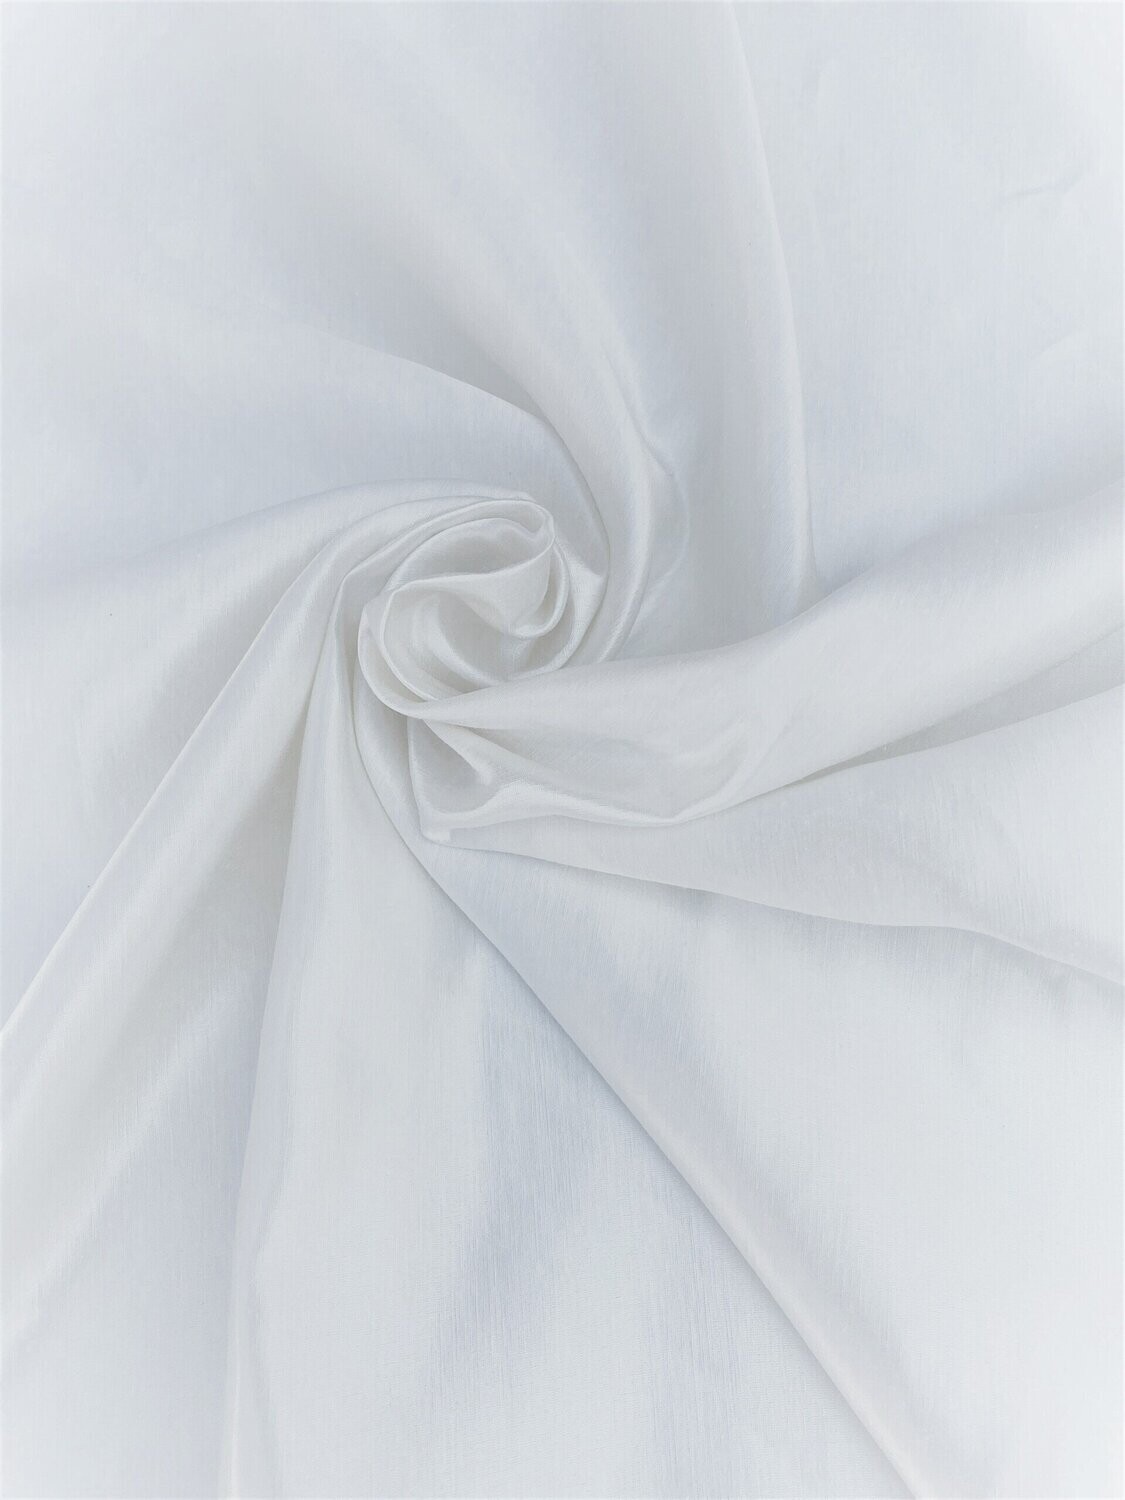 Silk Fabrics | EnviroTextiles® Sustainable Biodegradable Products